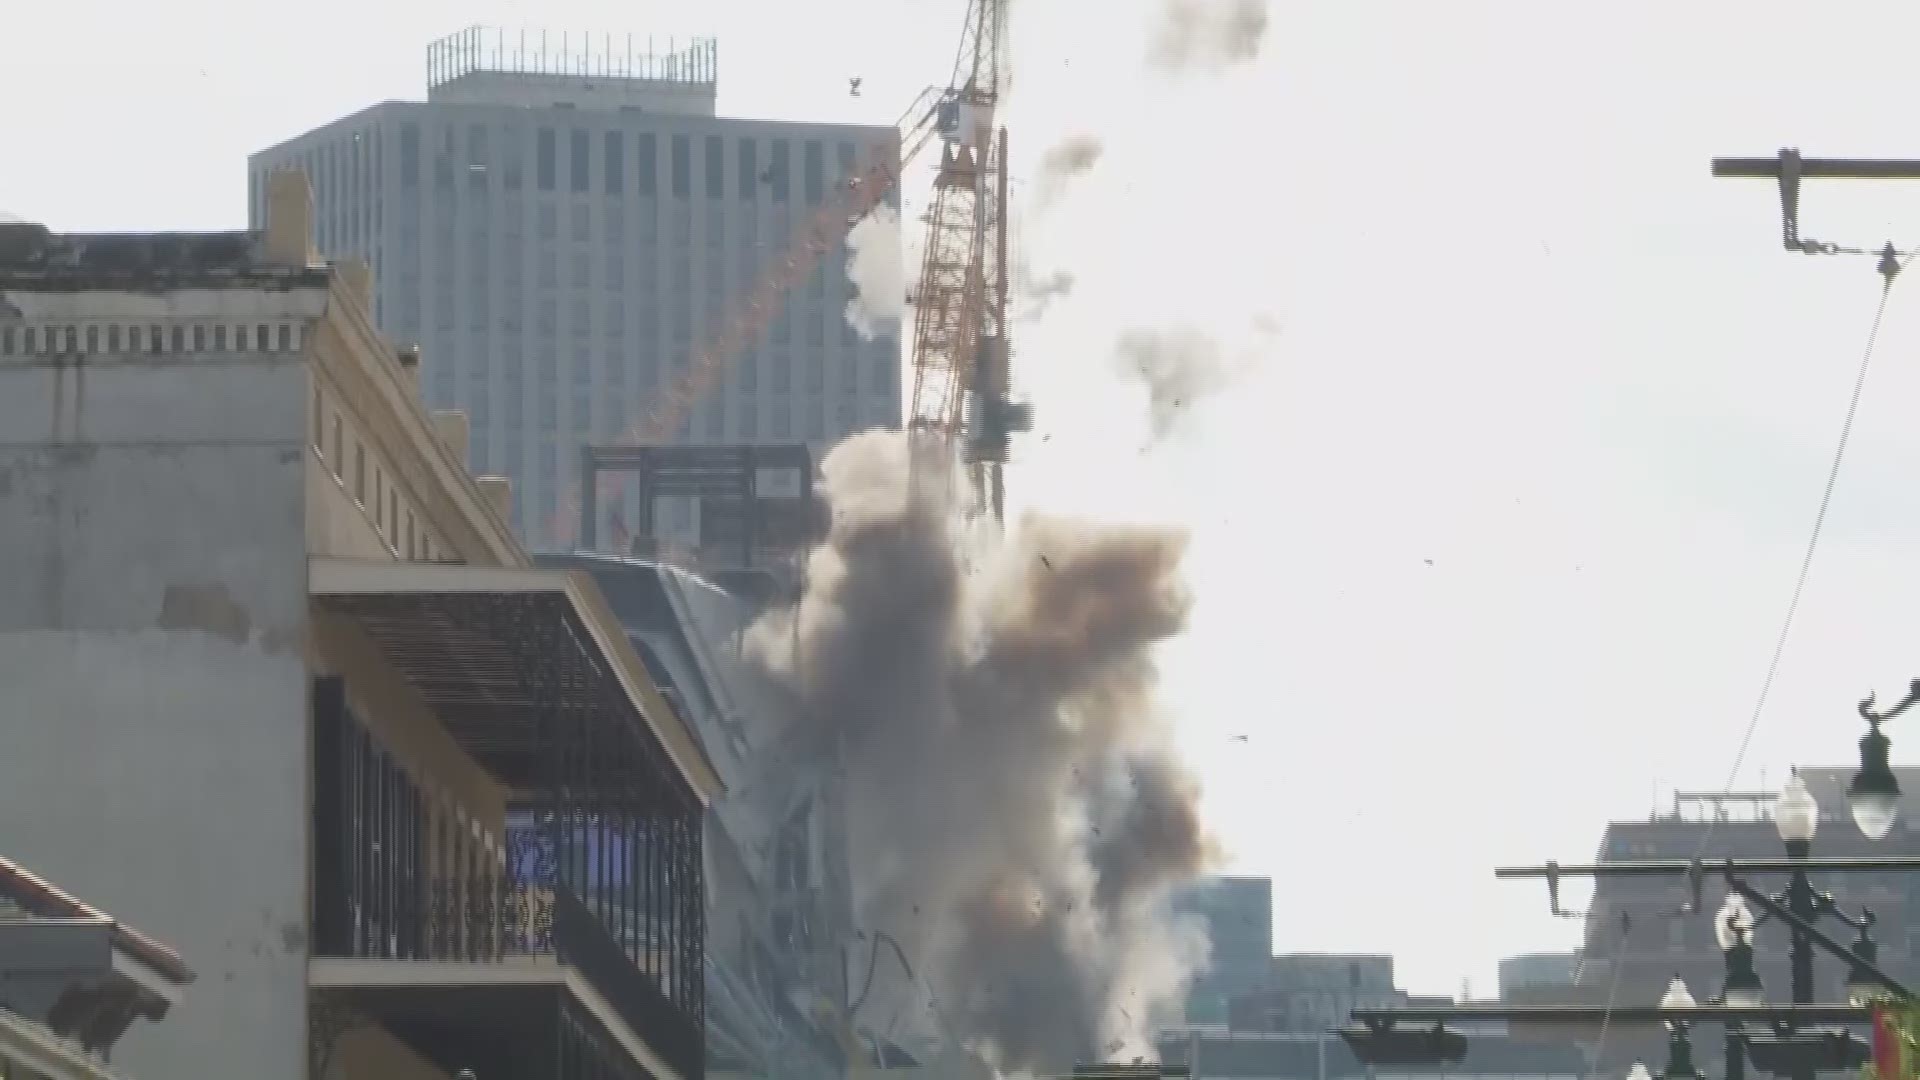 Six cameras capture the demolition of two unstable cranes standing over the Hard Rock Hotel collapse site in New Orleans from every angle.